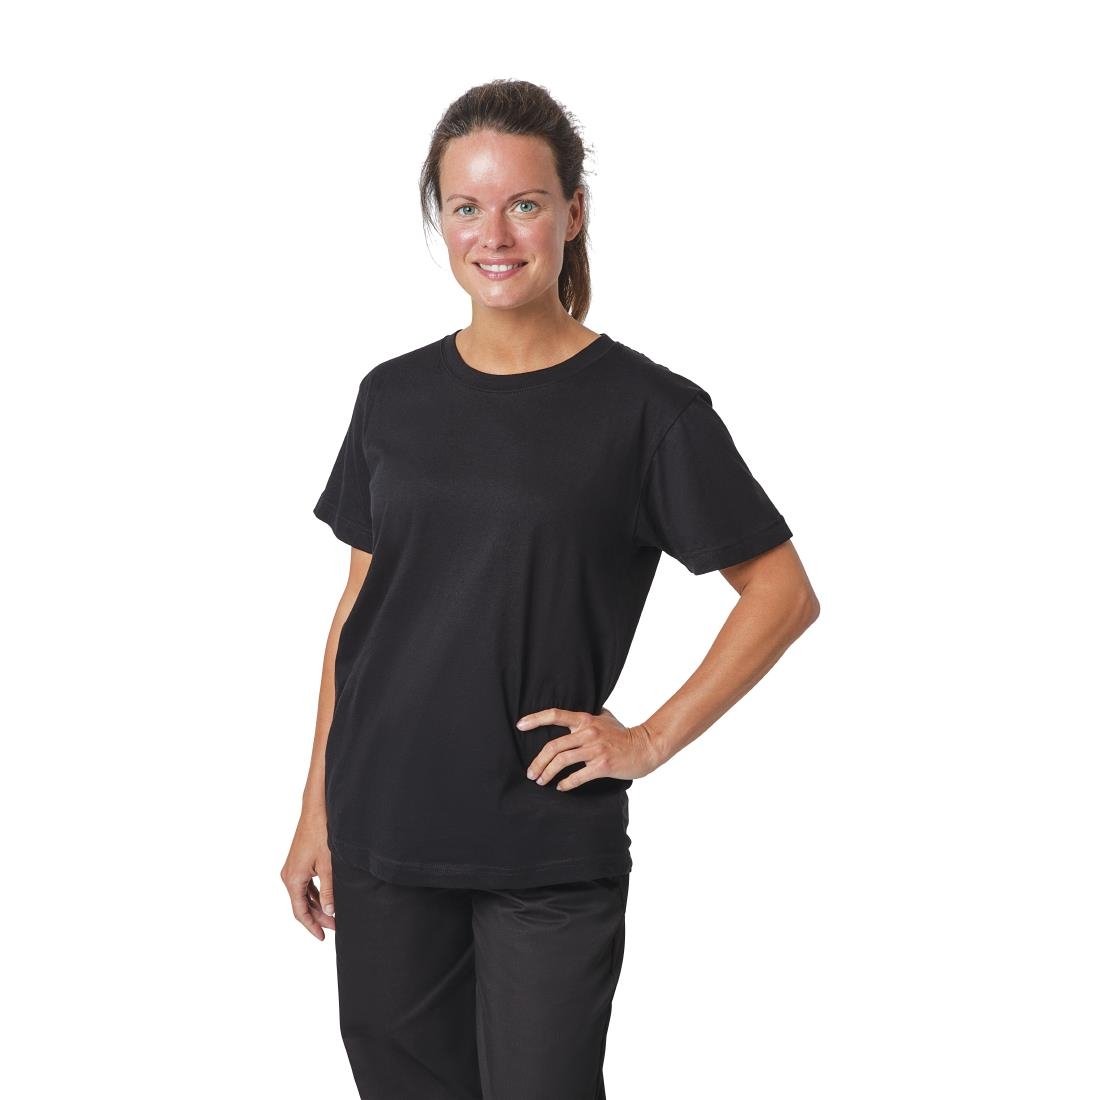 A295-S Unisex Chef T-Shirt Black S JD Catering Equipment Solutions Ltd